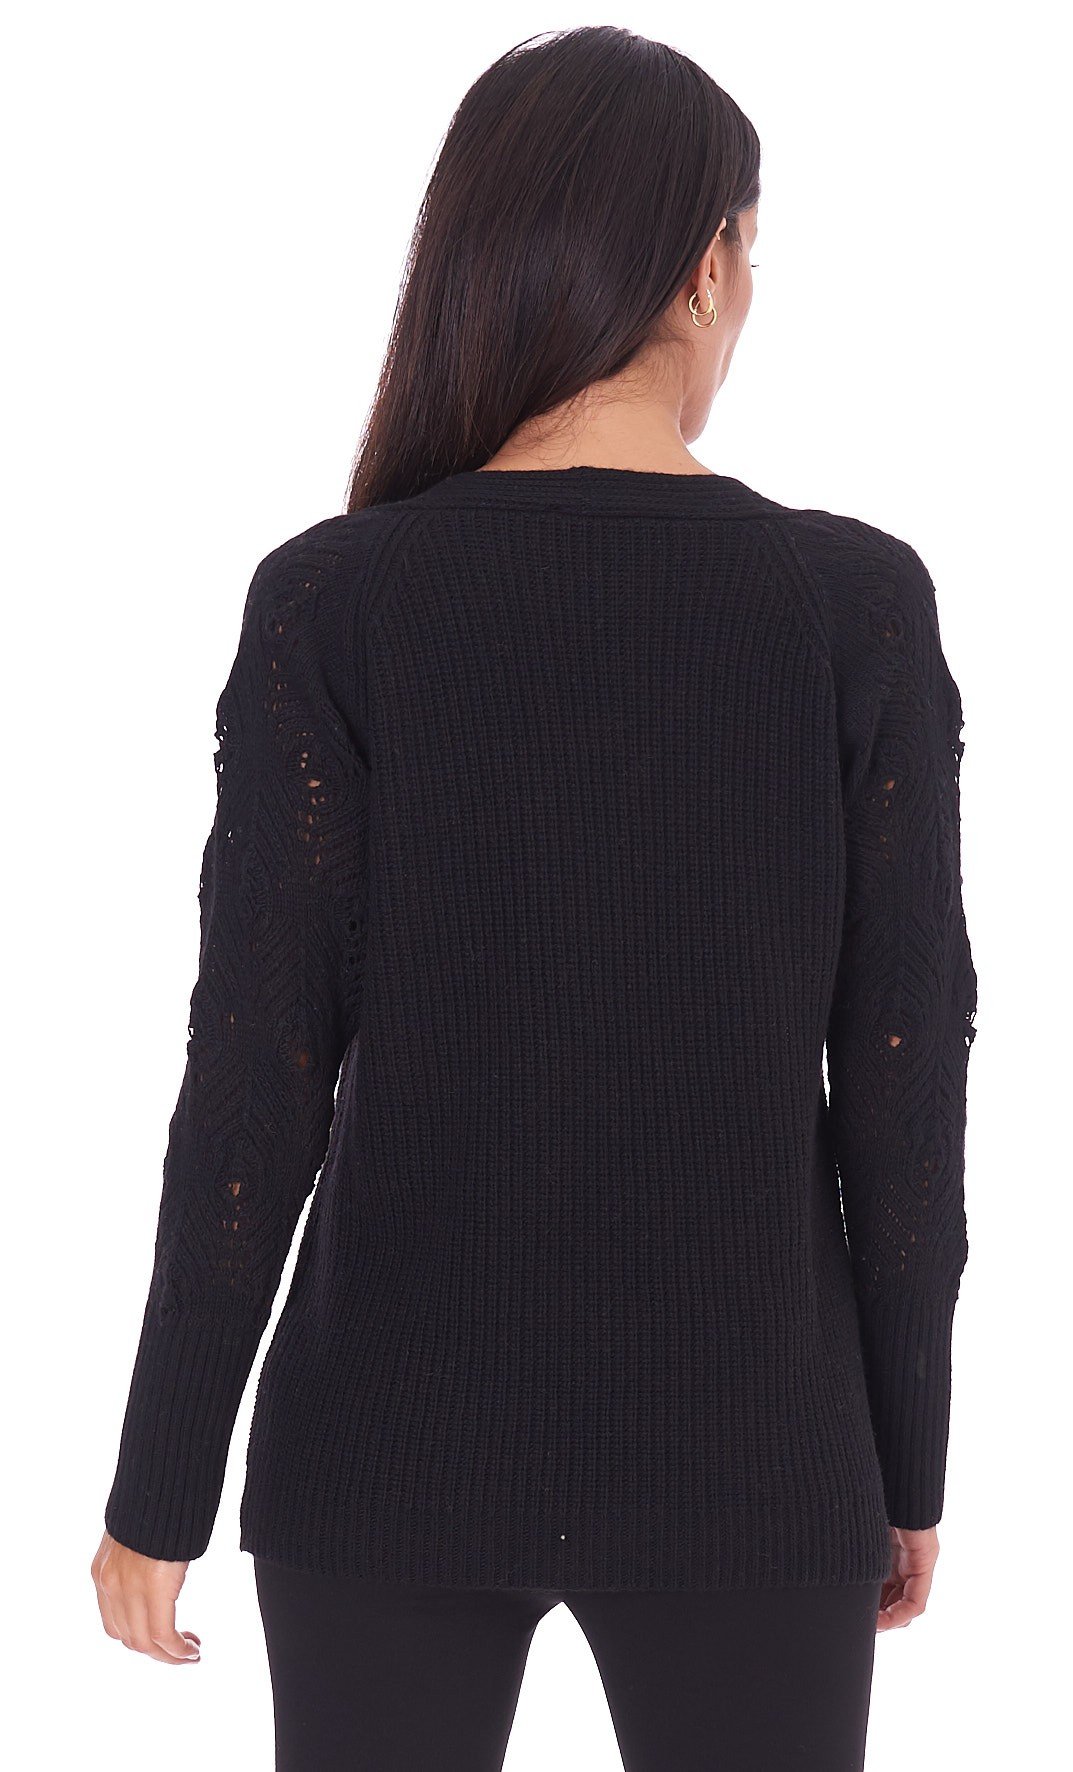 Women's Maria Bellentani sweater with perforated sleeves